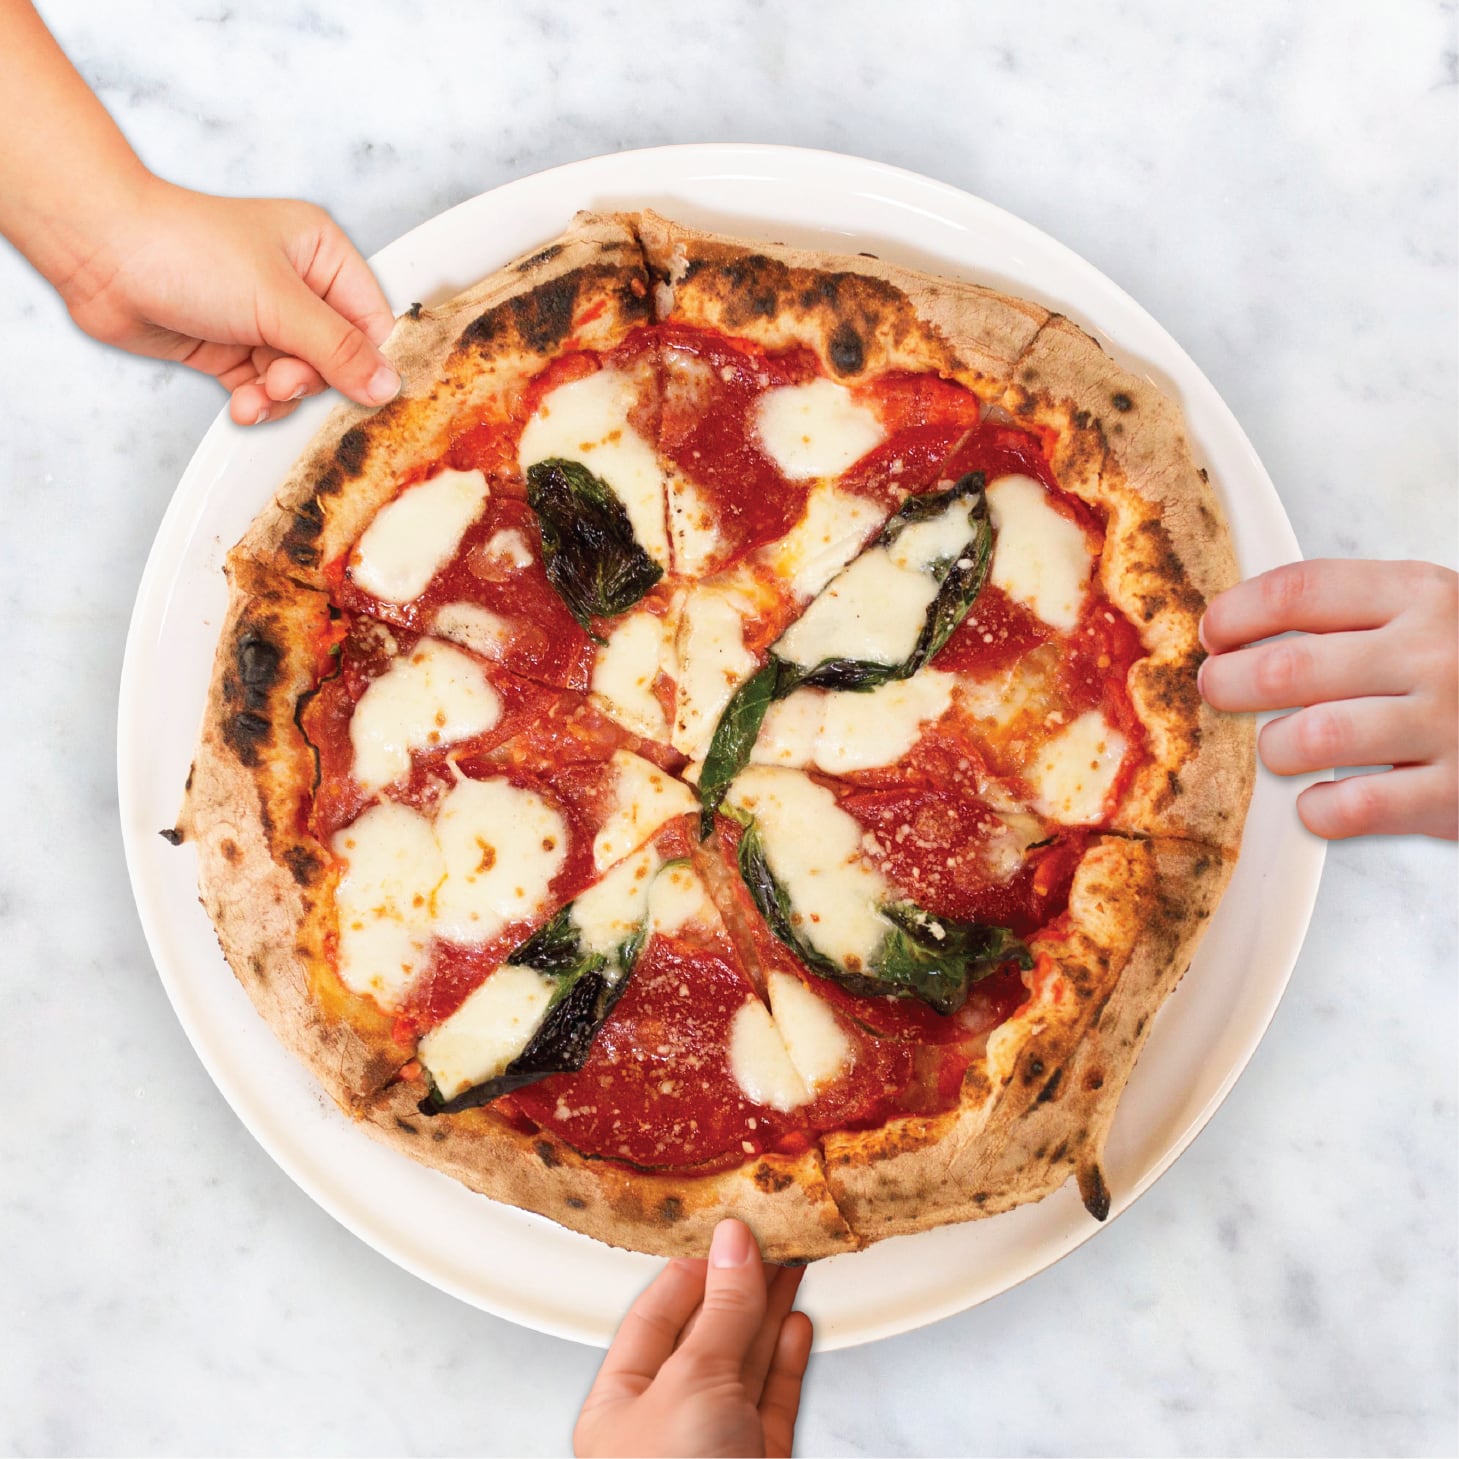 MidiCi is a Neapolitan pizza joint, which means pizzas are cooked hot and fast.